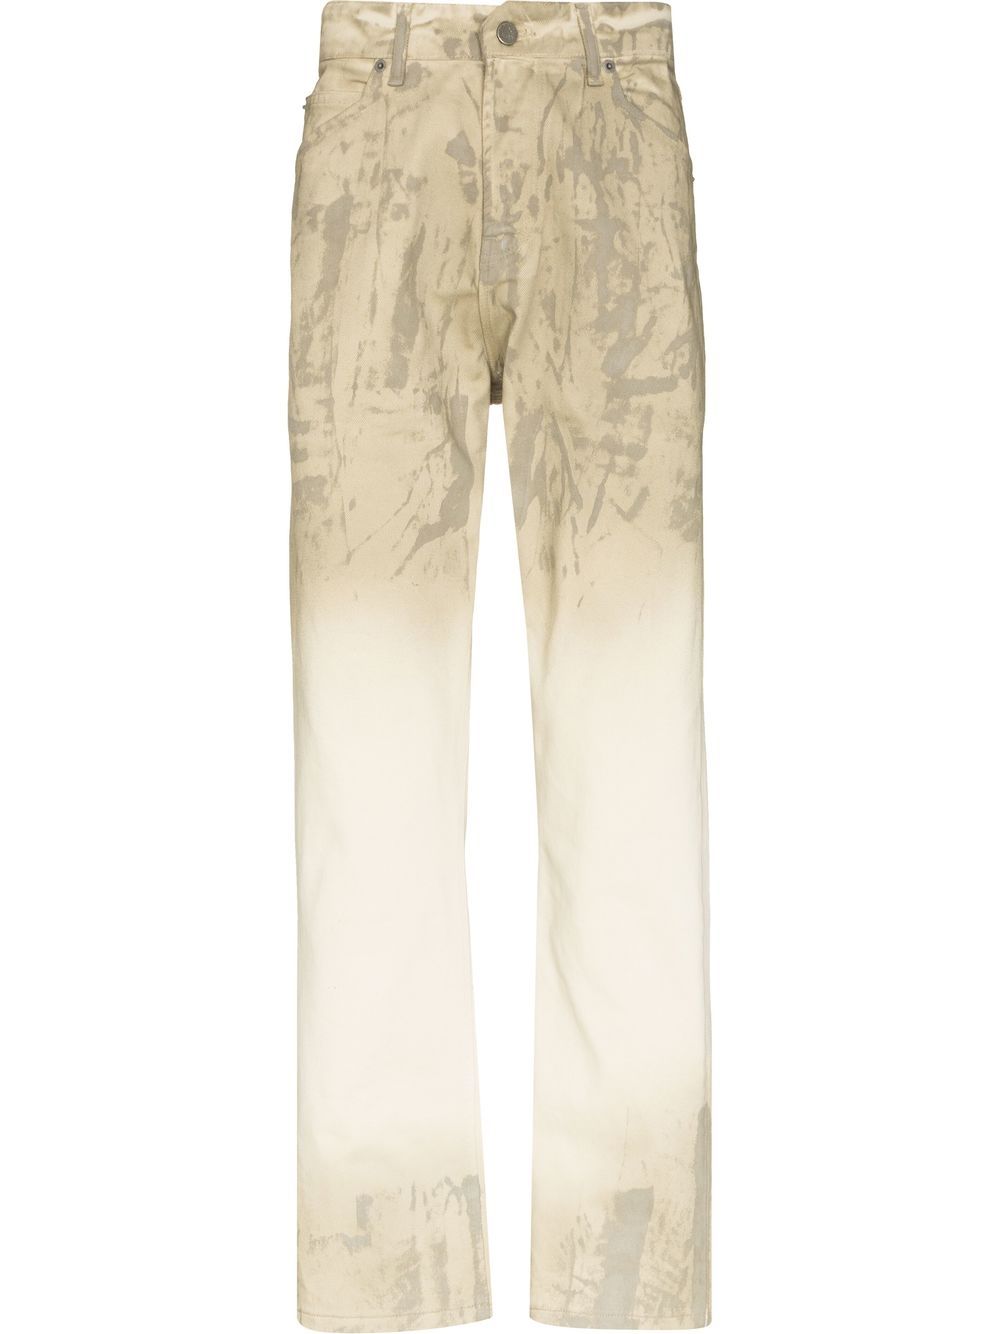 A-COLD-WALL* Corrosion straight-leg jeans - Neutrals von A-COLD-WALL*